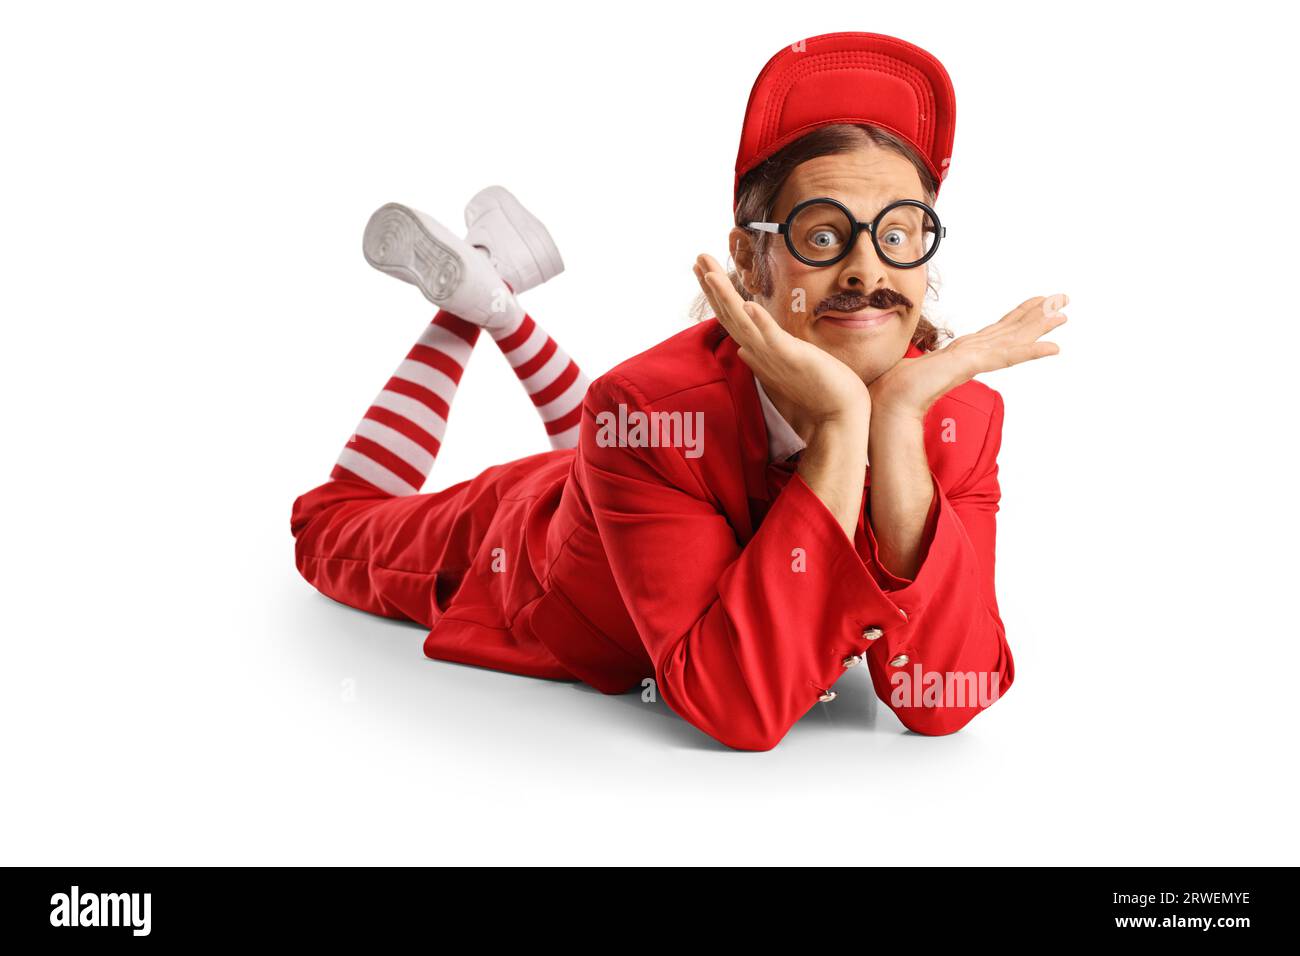 Funny entertainer in a red suit laying on the floor and looking at camera isolated on white background Stock Photo